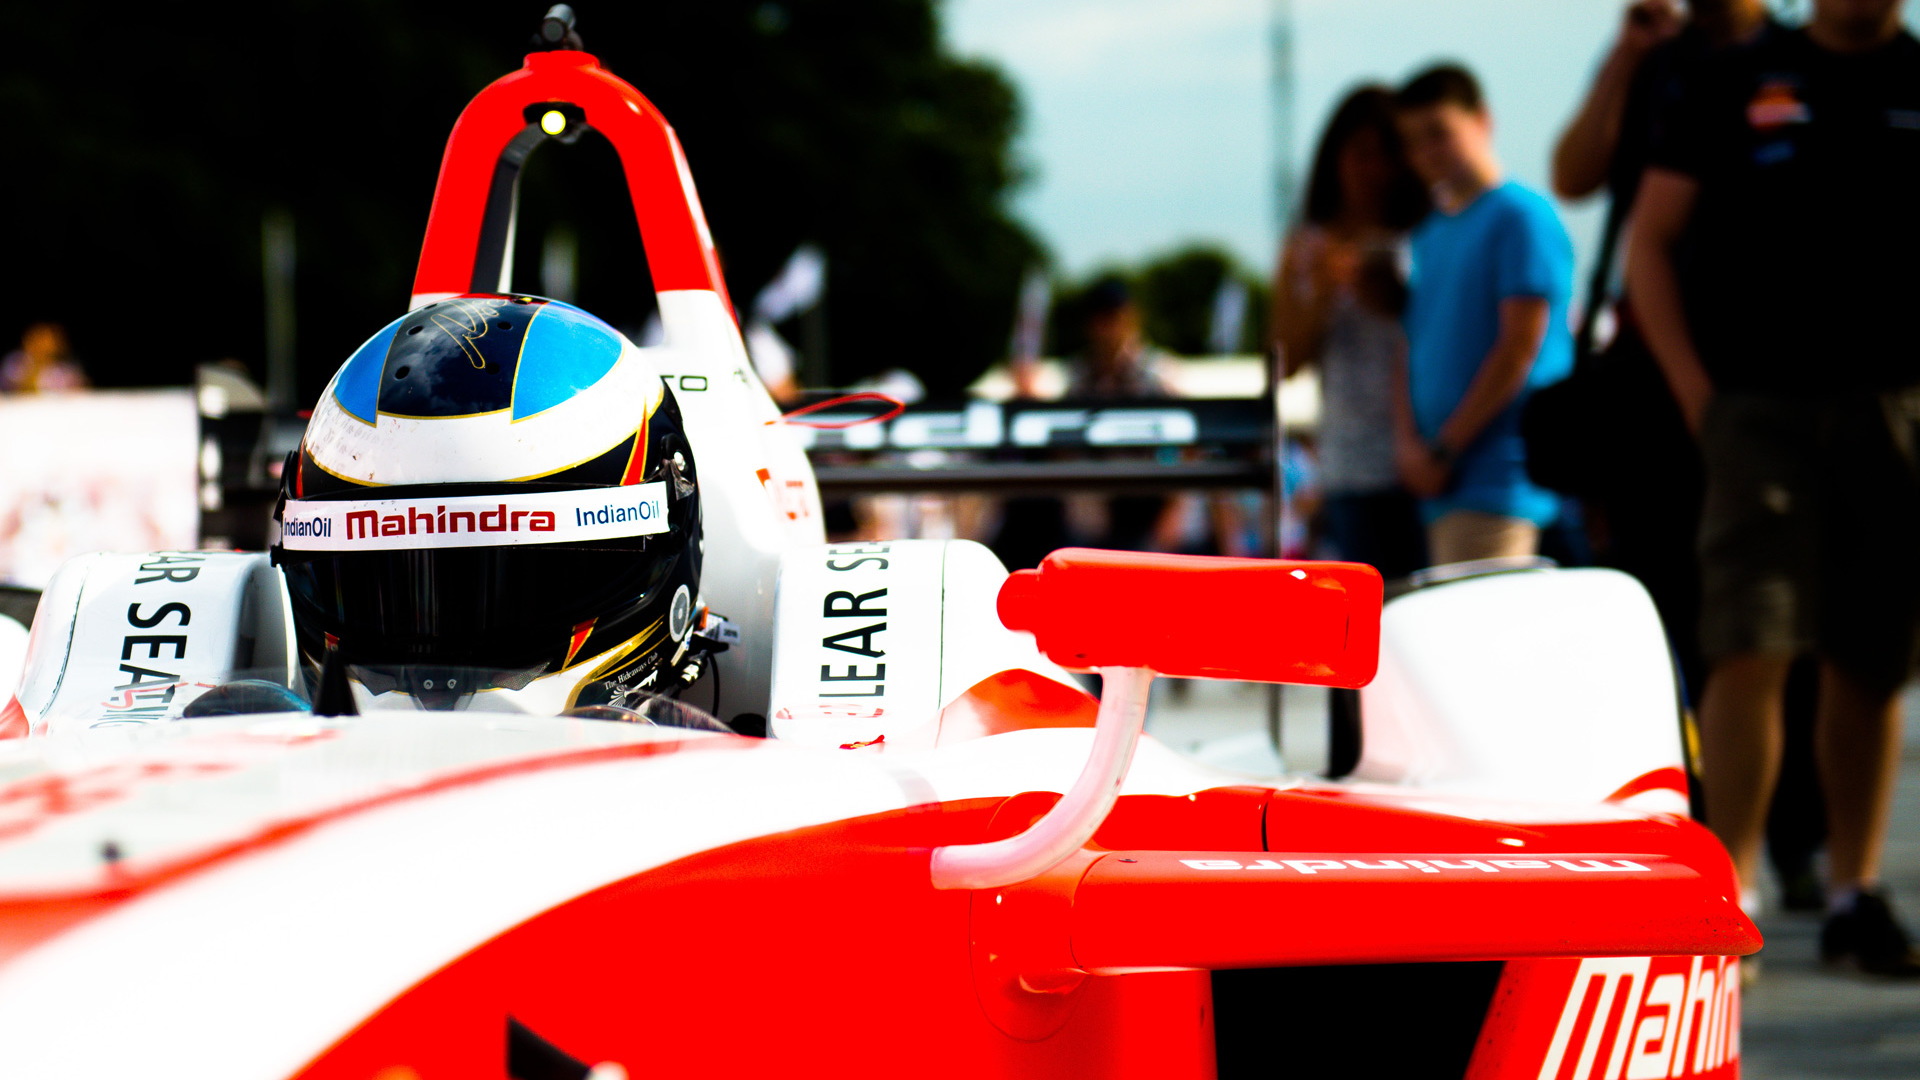 Nick Heidfeld in a Mahindra M4Electric Formula E race car at the 2017 Goodwood Festival of Speed